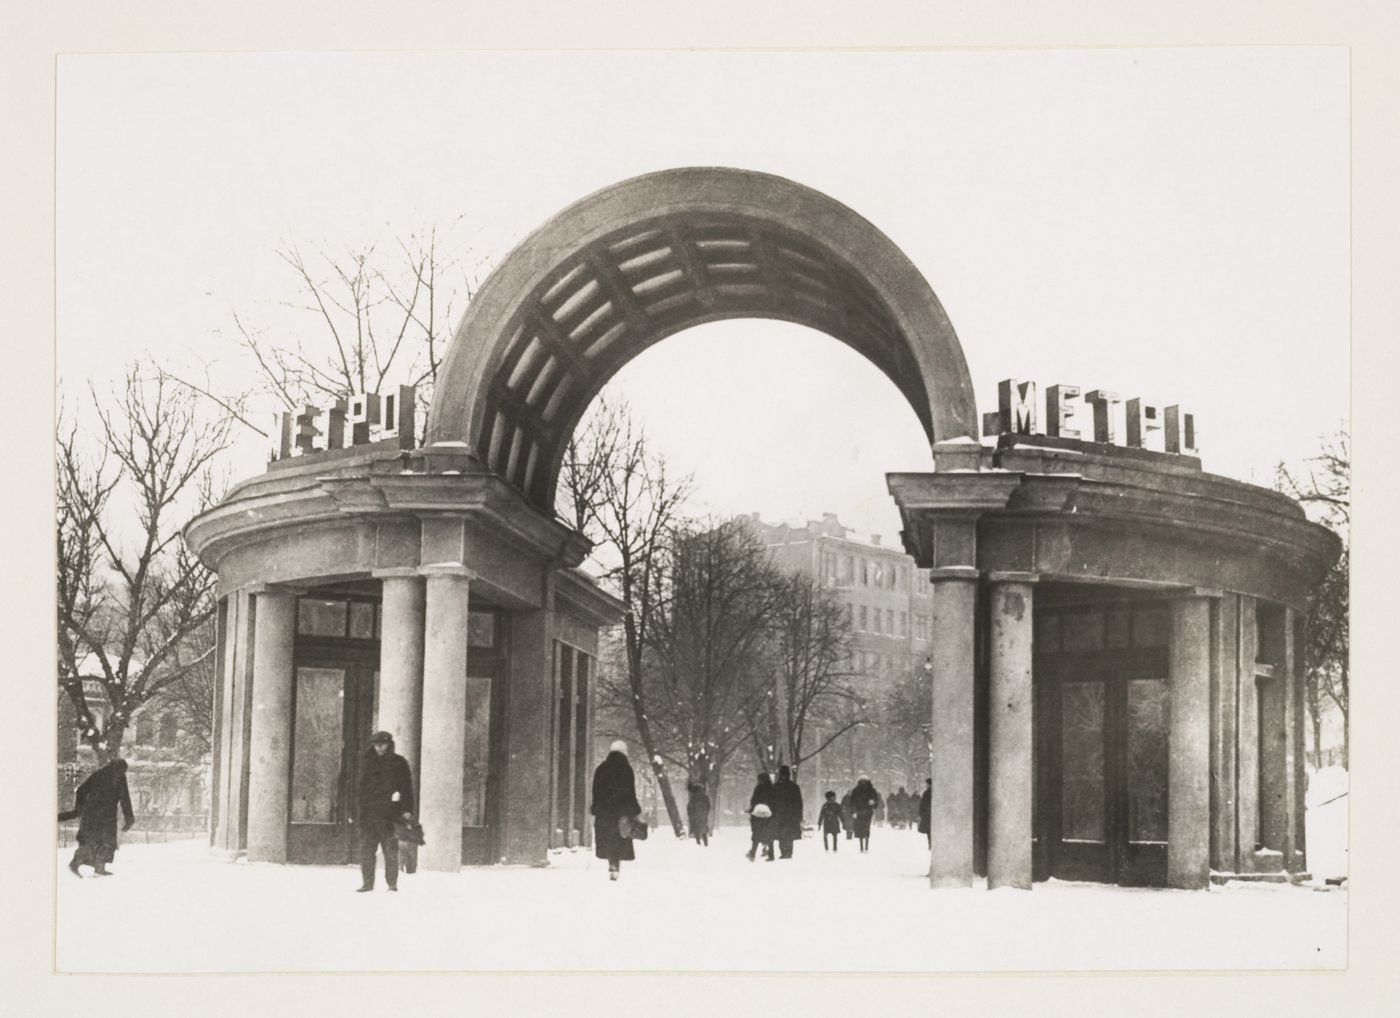 View of the entrance to Dvorets Sovetov (Palace of Soviets, now Kropotkinskaya) metro station, Moscow, Soviet Union